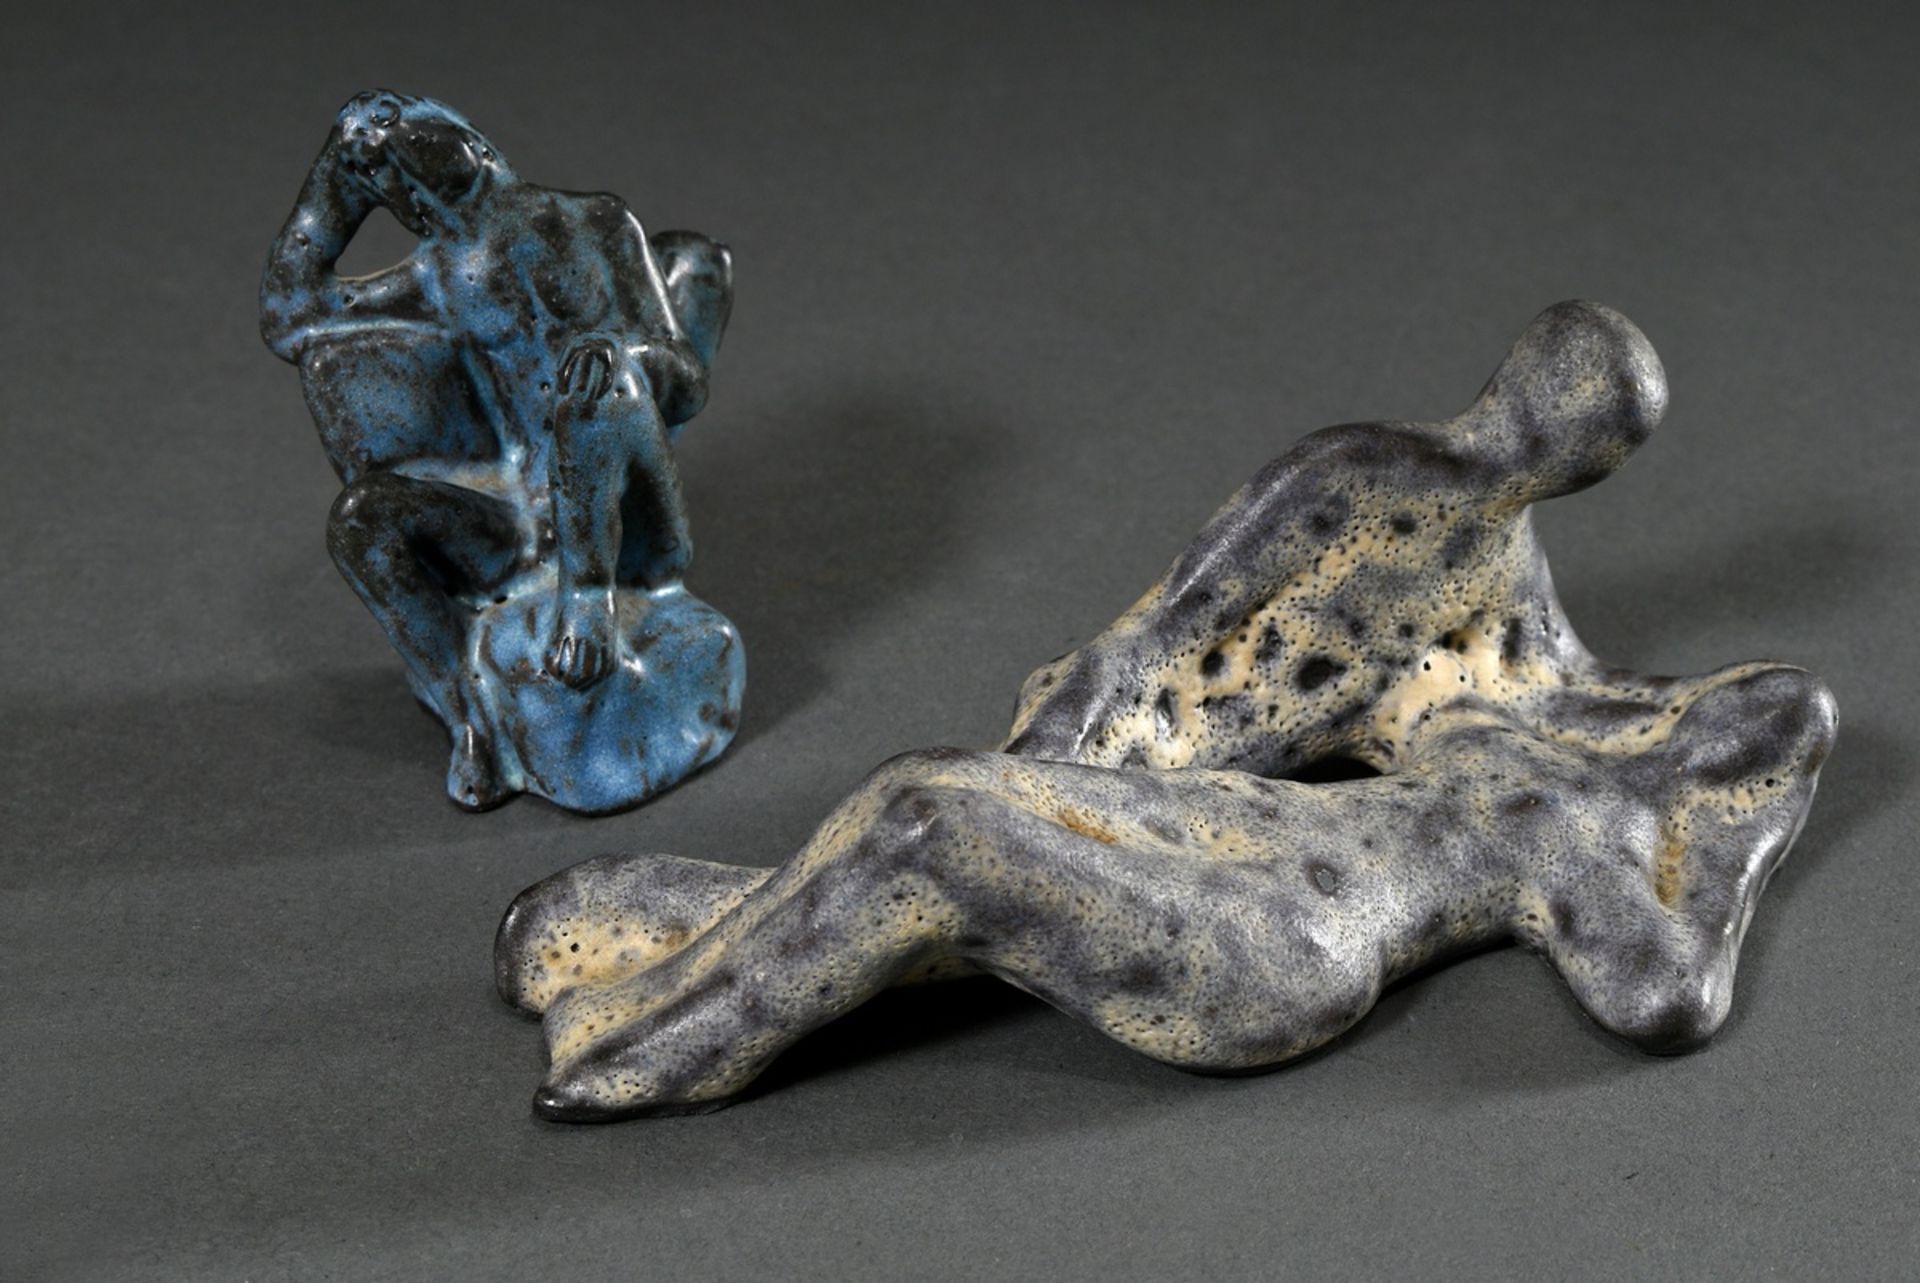 2 Various Maetzel, Monika (1917-2010) figures "Lying lovers" and "Male nude on chair", glazed ceram